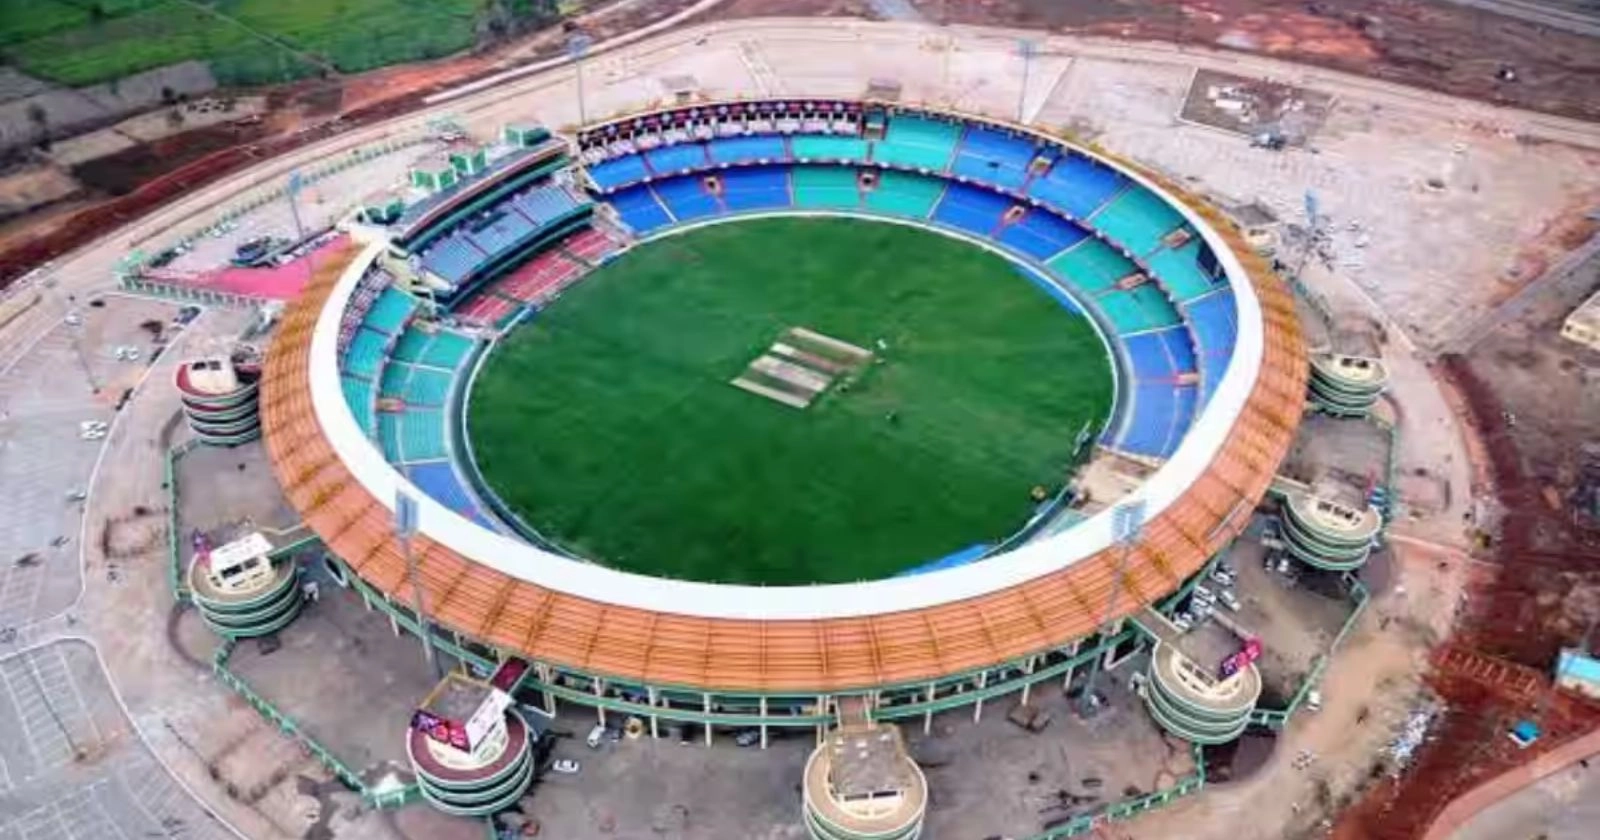 The Board Of Cricket Control In India (BCCI) has given the green light to the construction of the Bilaspur Cricket Stadium.